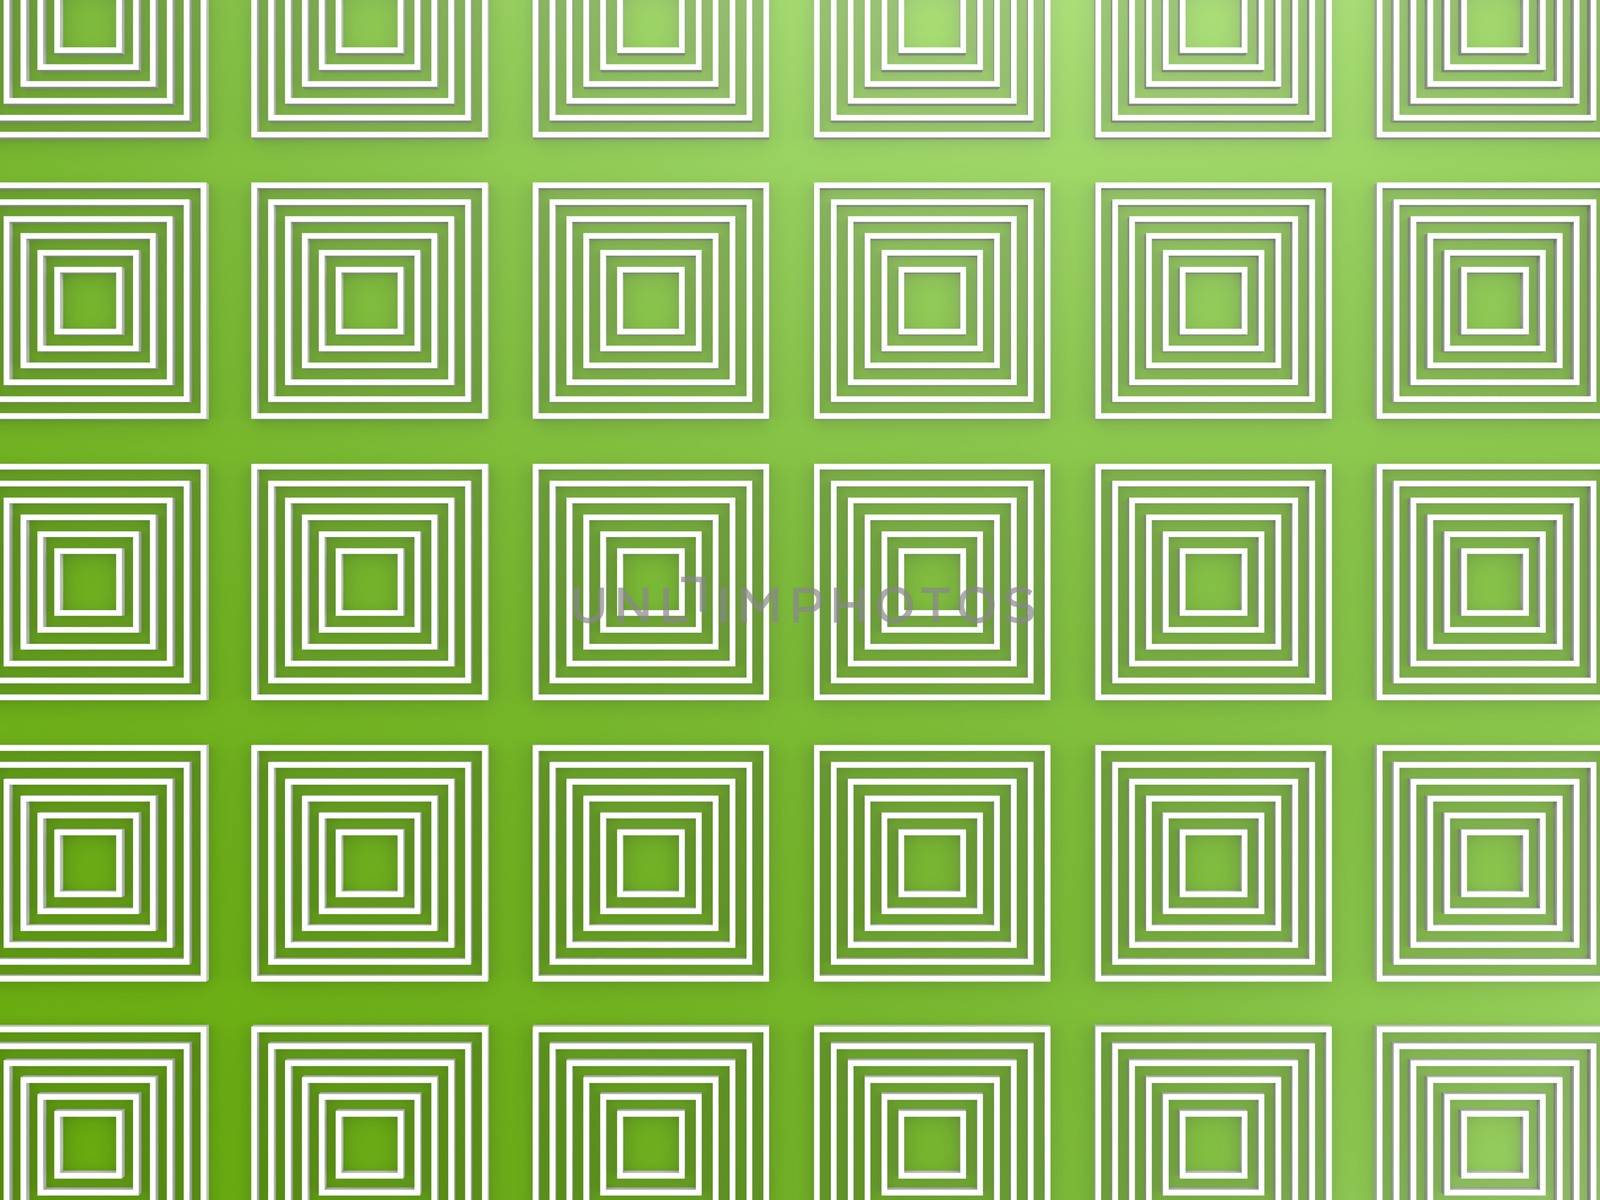 Green square pattern by tang90246